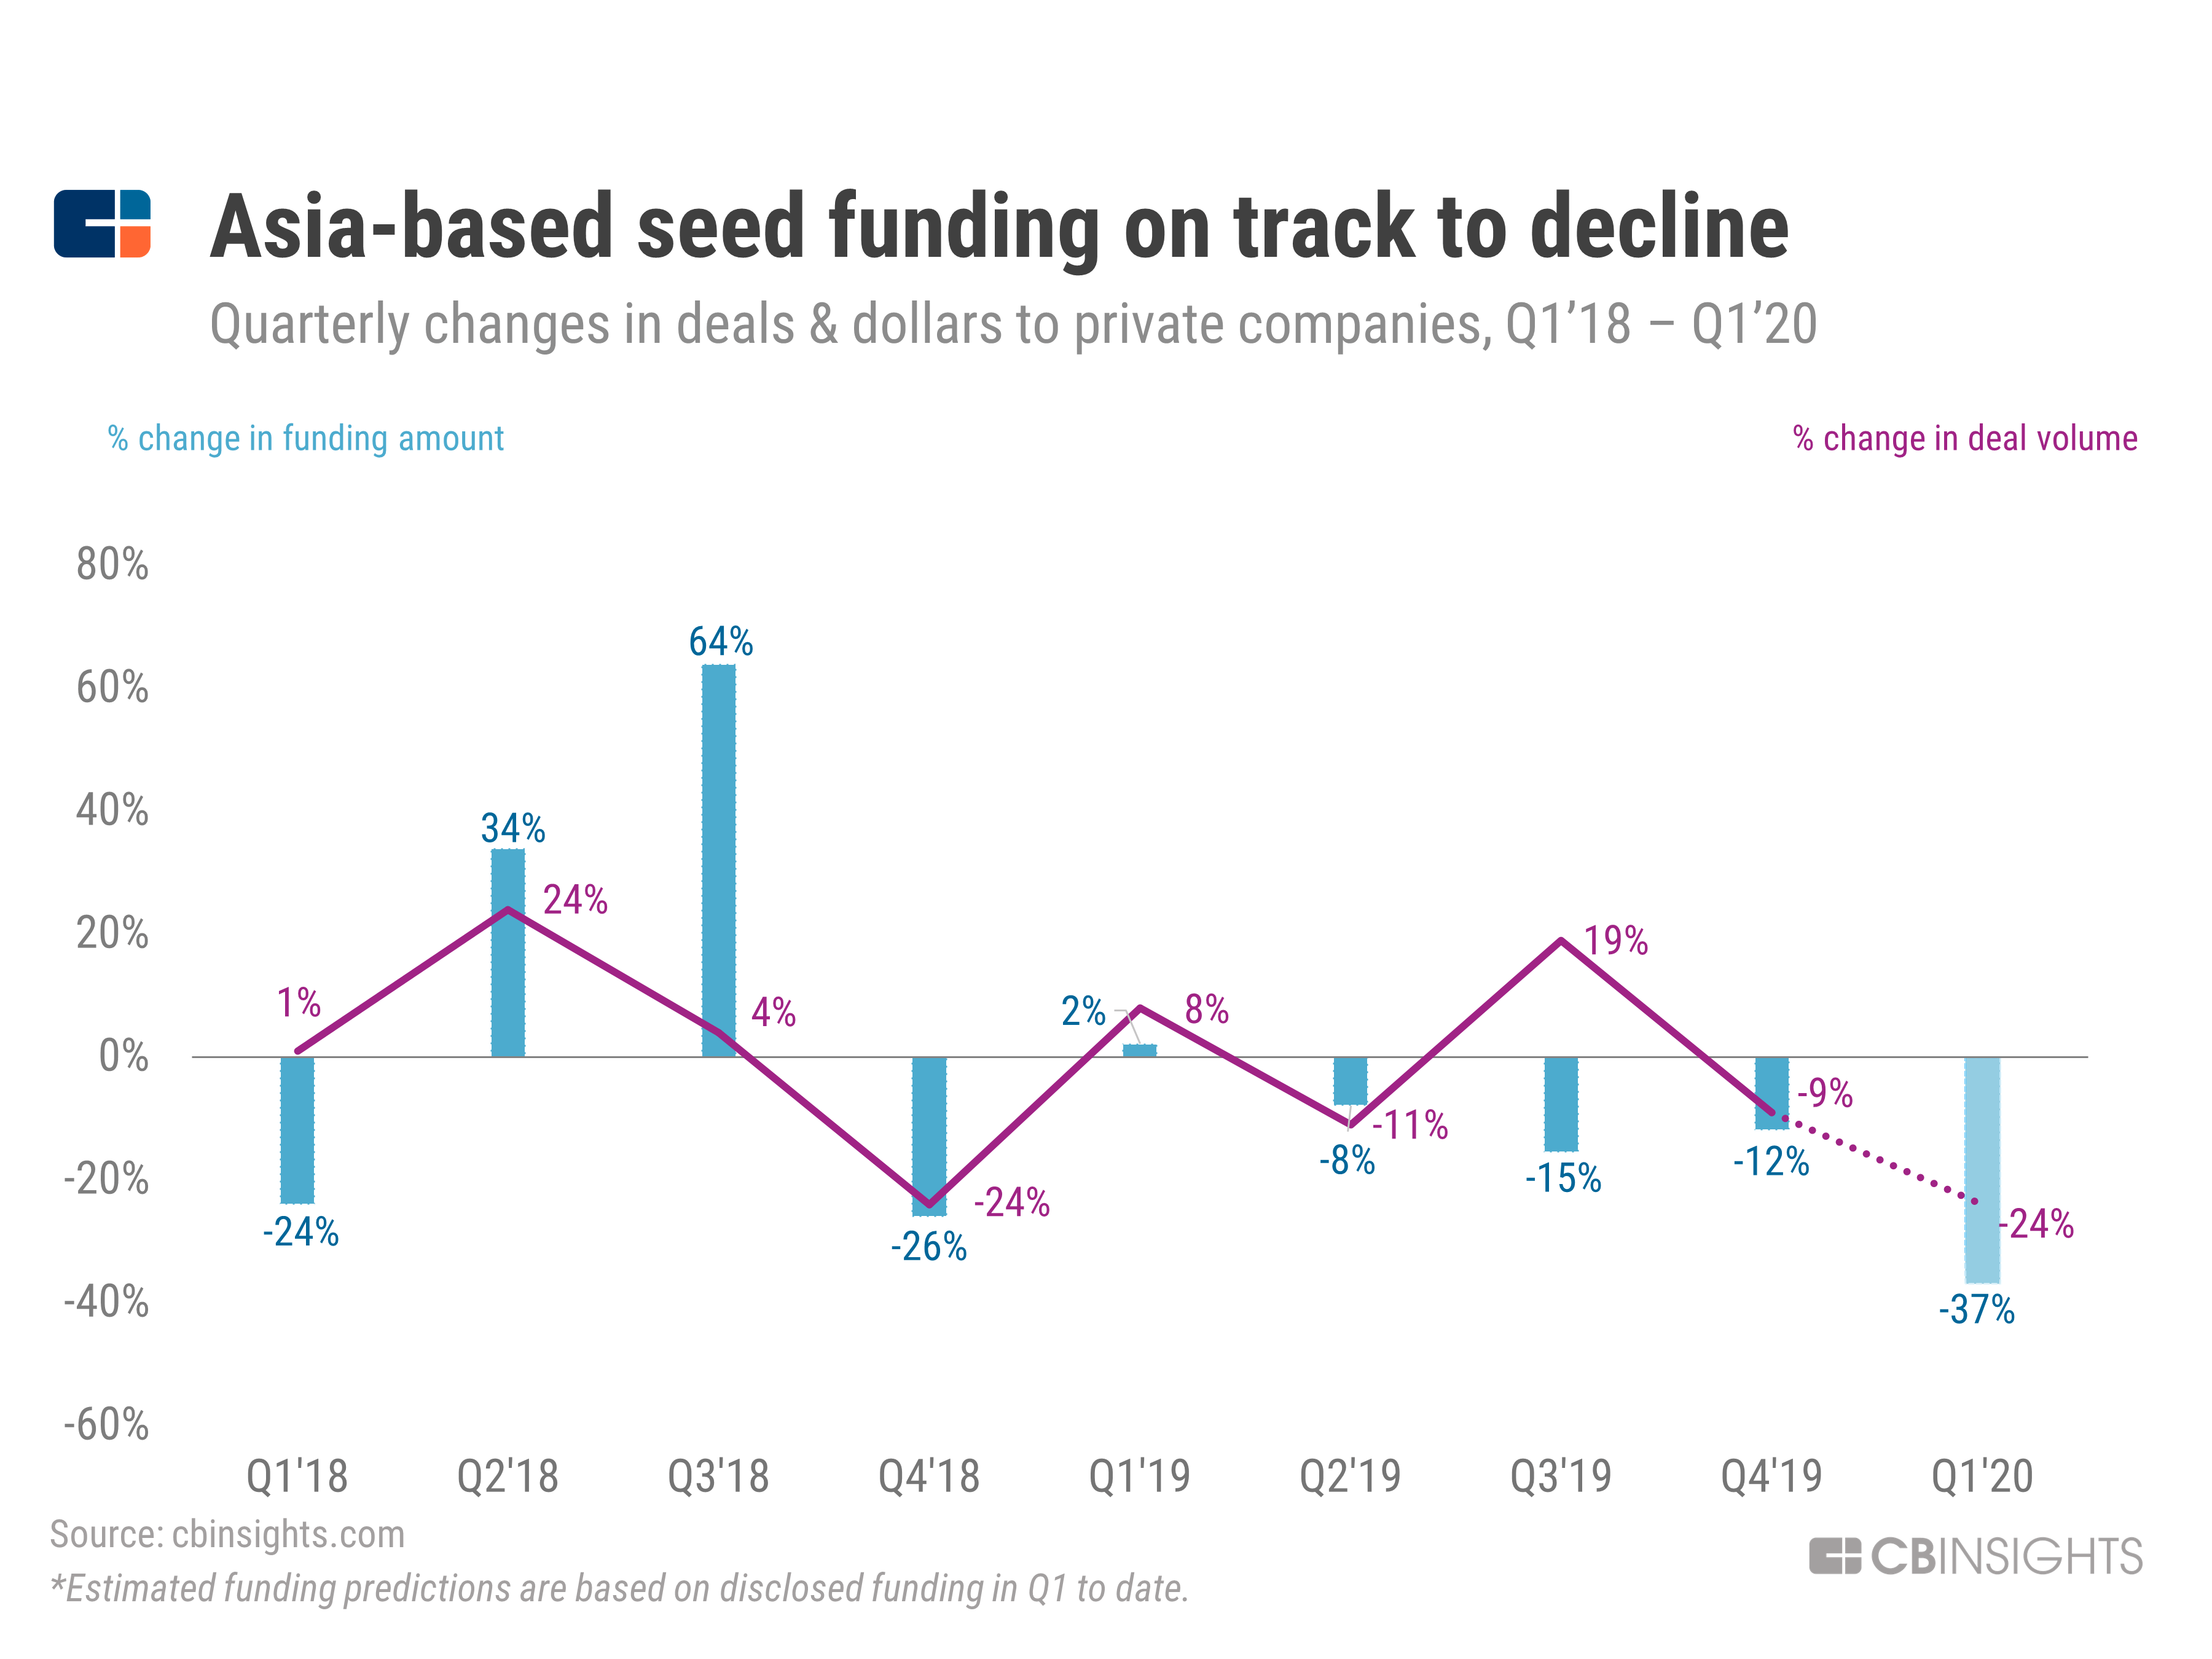 Despite the slowdown in investment in high-tech, the Seed stage is still exciting